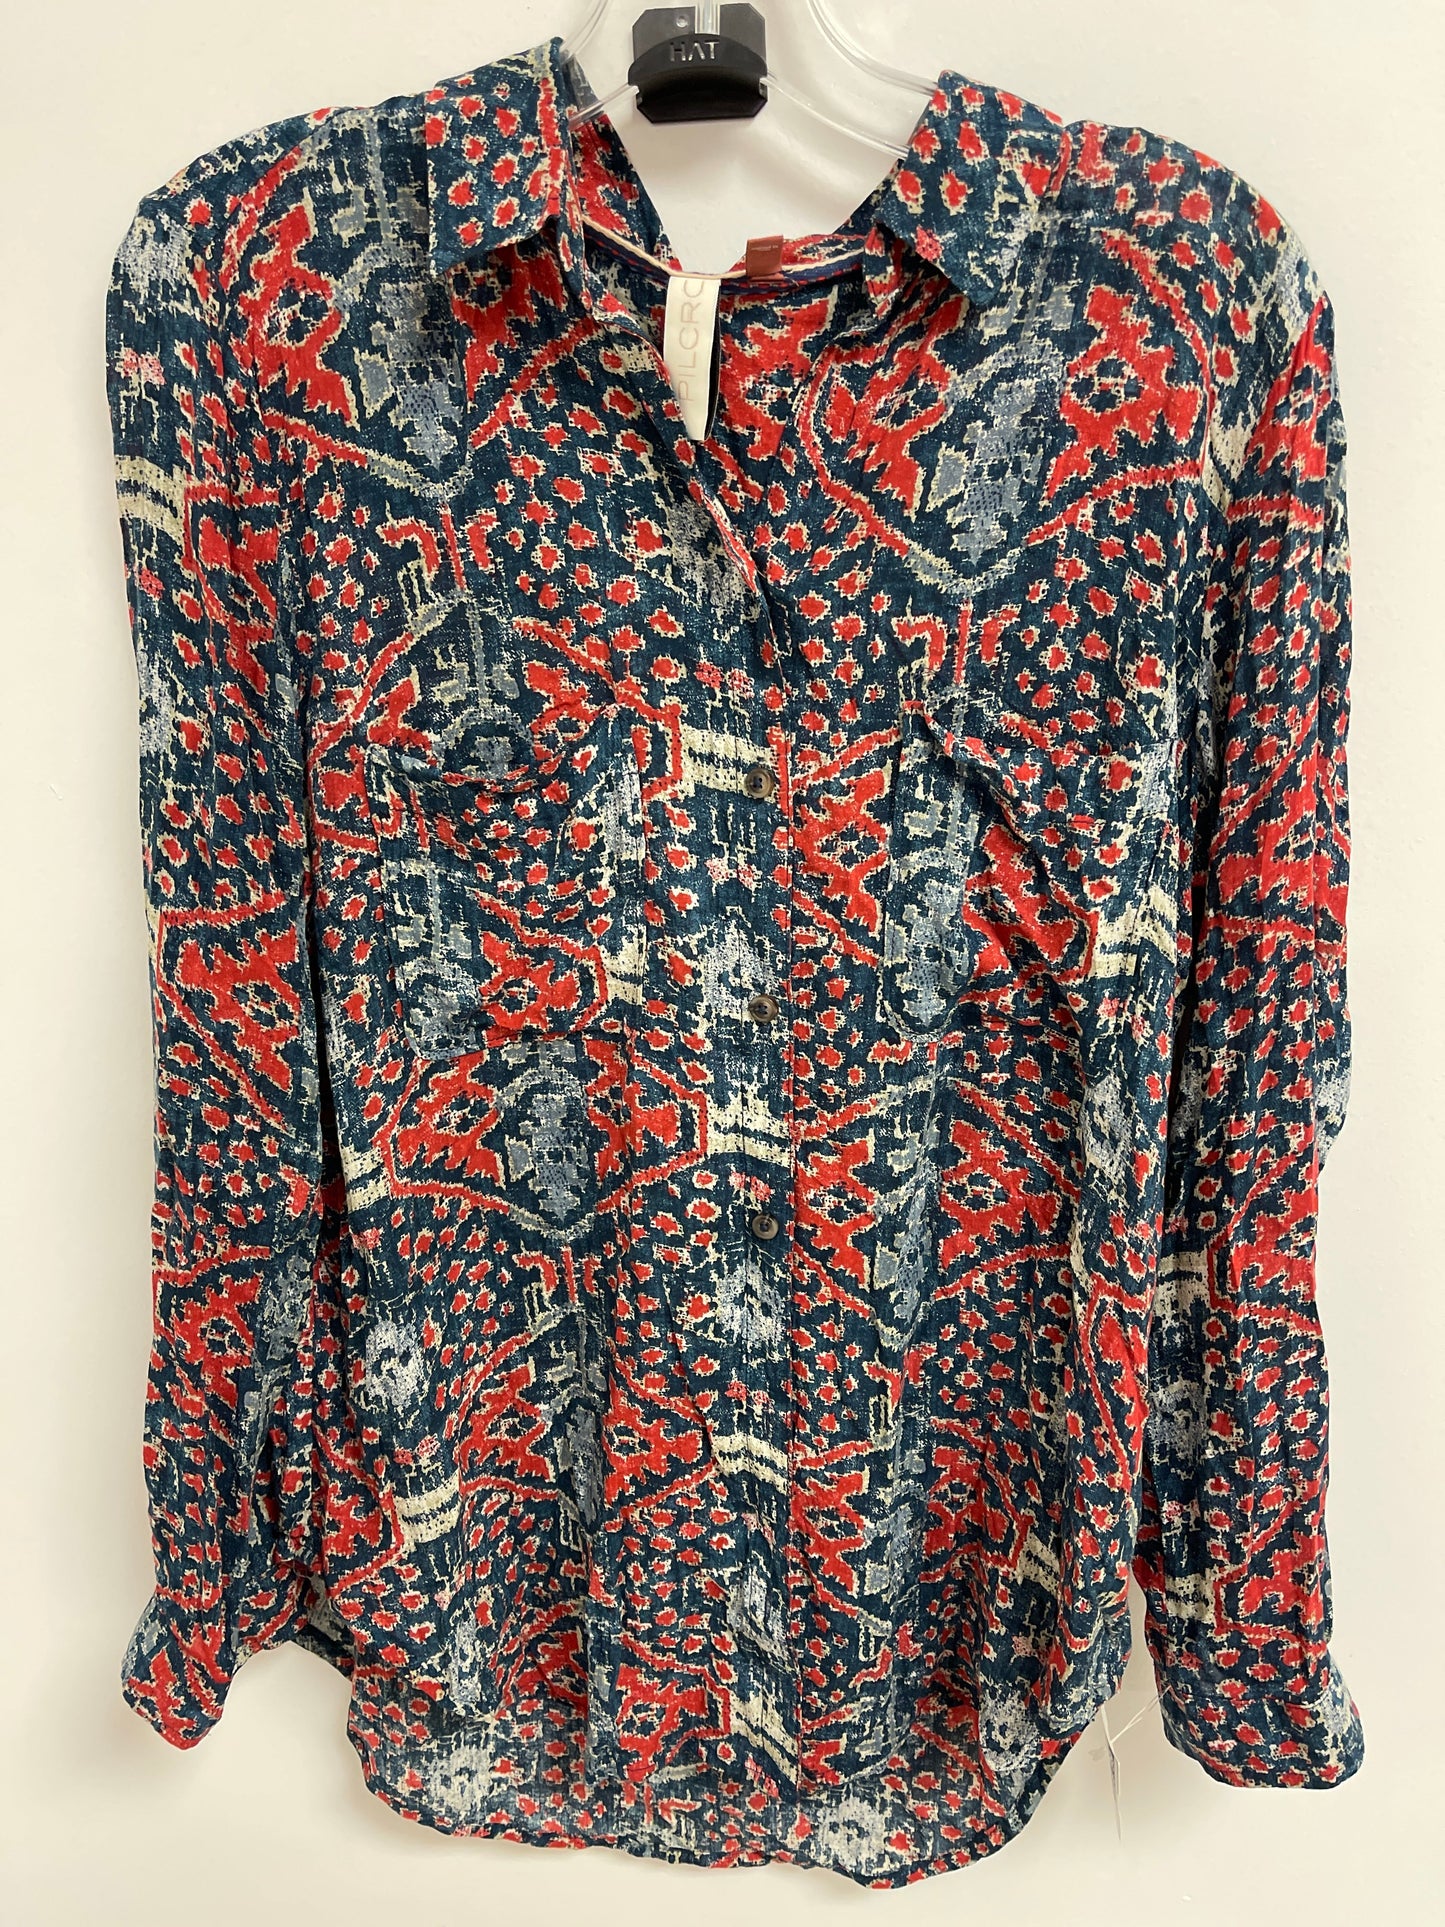 Blue & Red Top Long Sleeve Pilcro, Size M